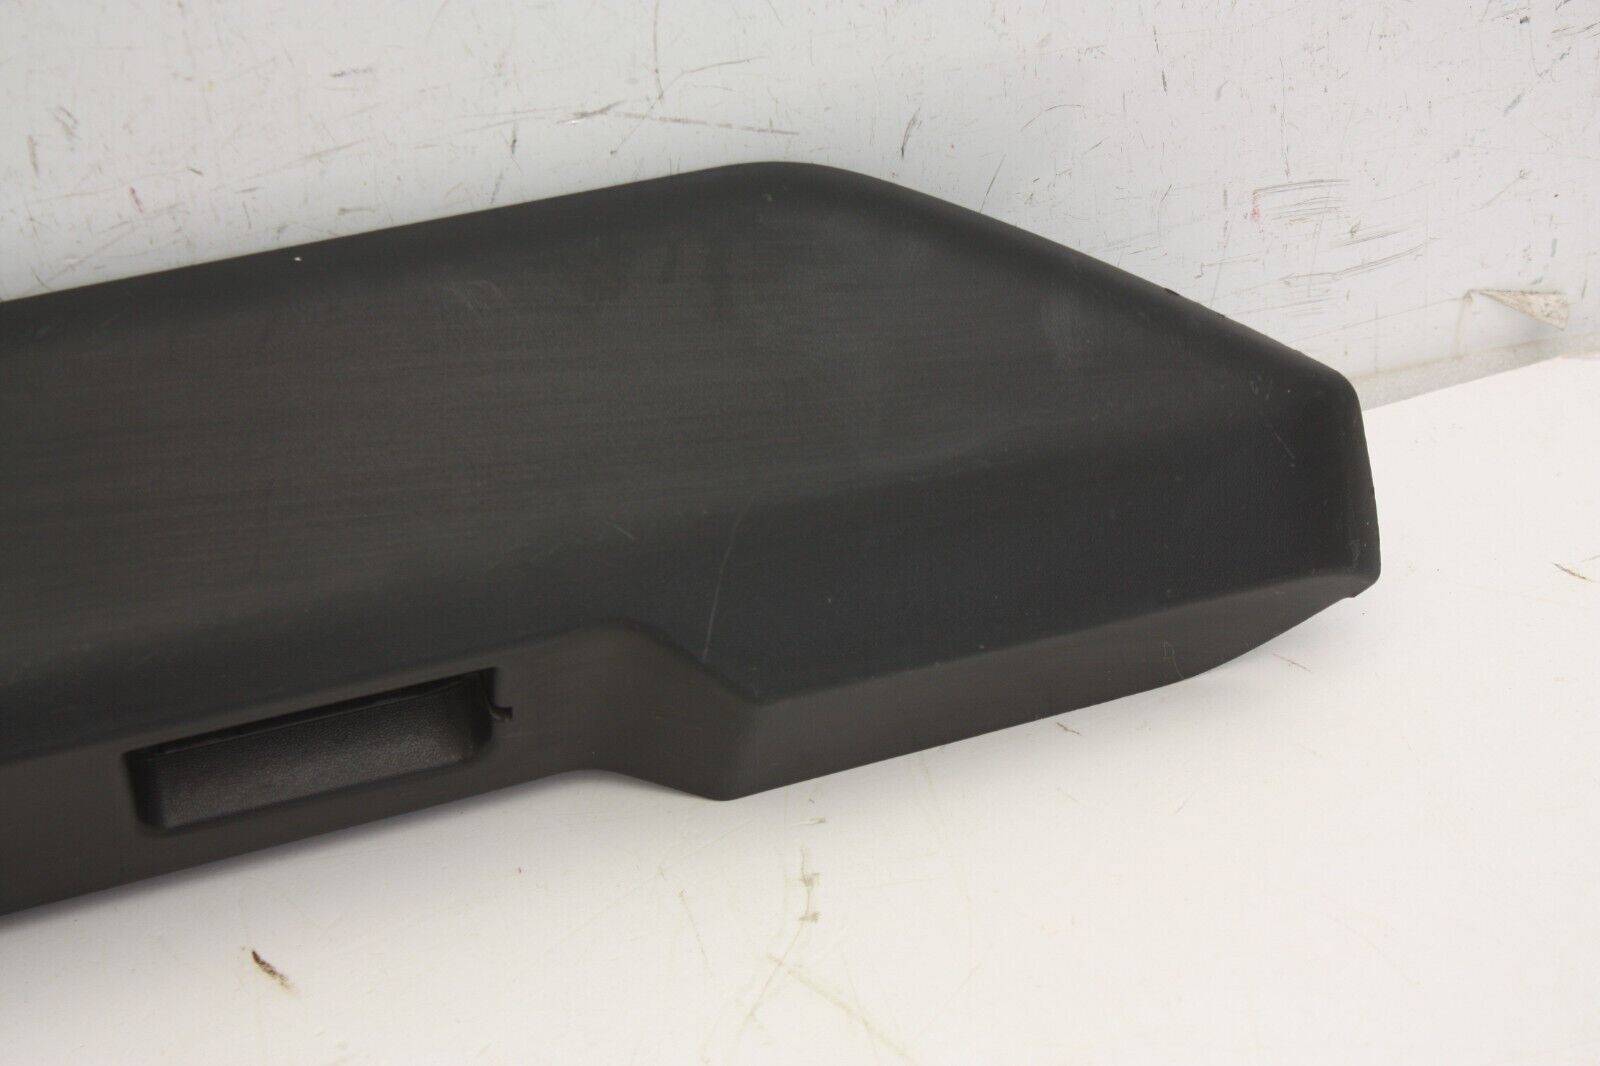 Ford-Transit-Custom-Tailgate-Lid-Cover-Recording-Bar-2018-ON-BK21-13555-AFW-176302846649-9